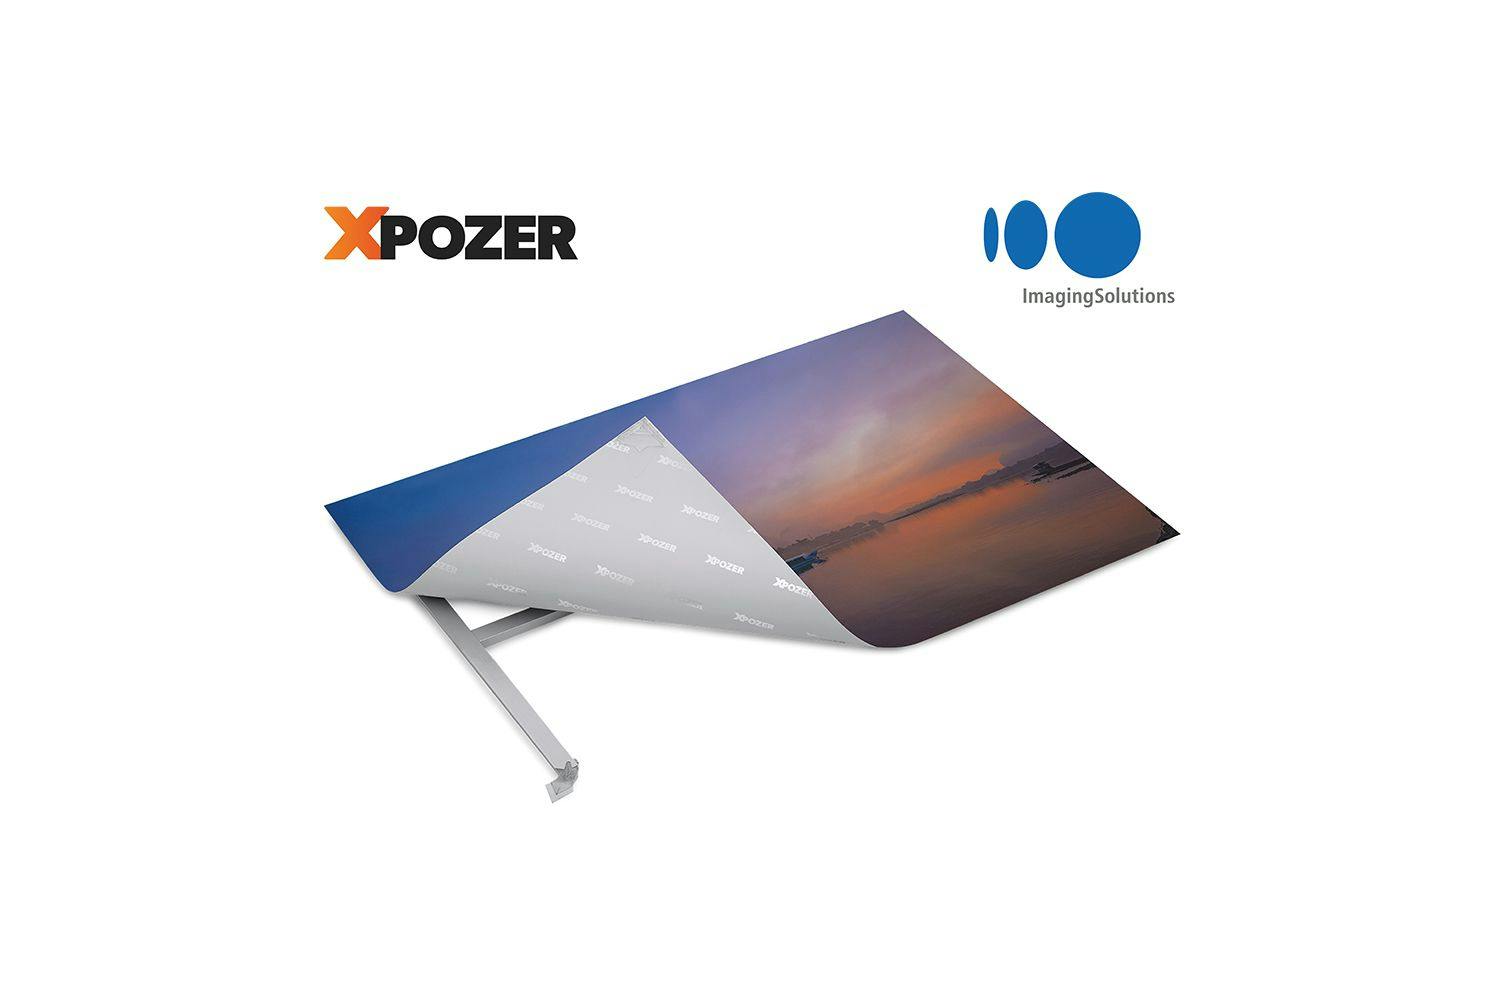 Imaging Solutions takes majority share in Xpozer 